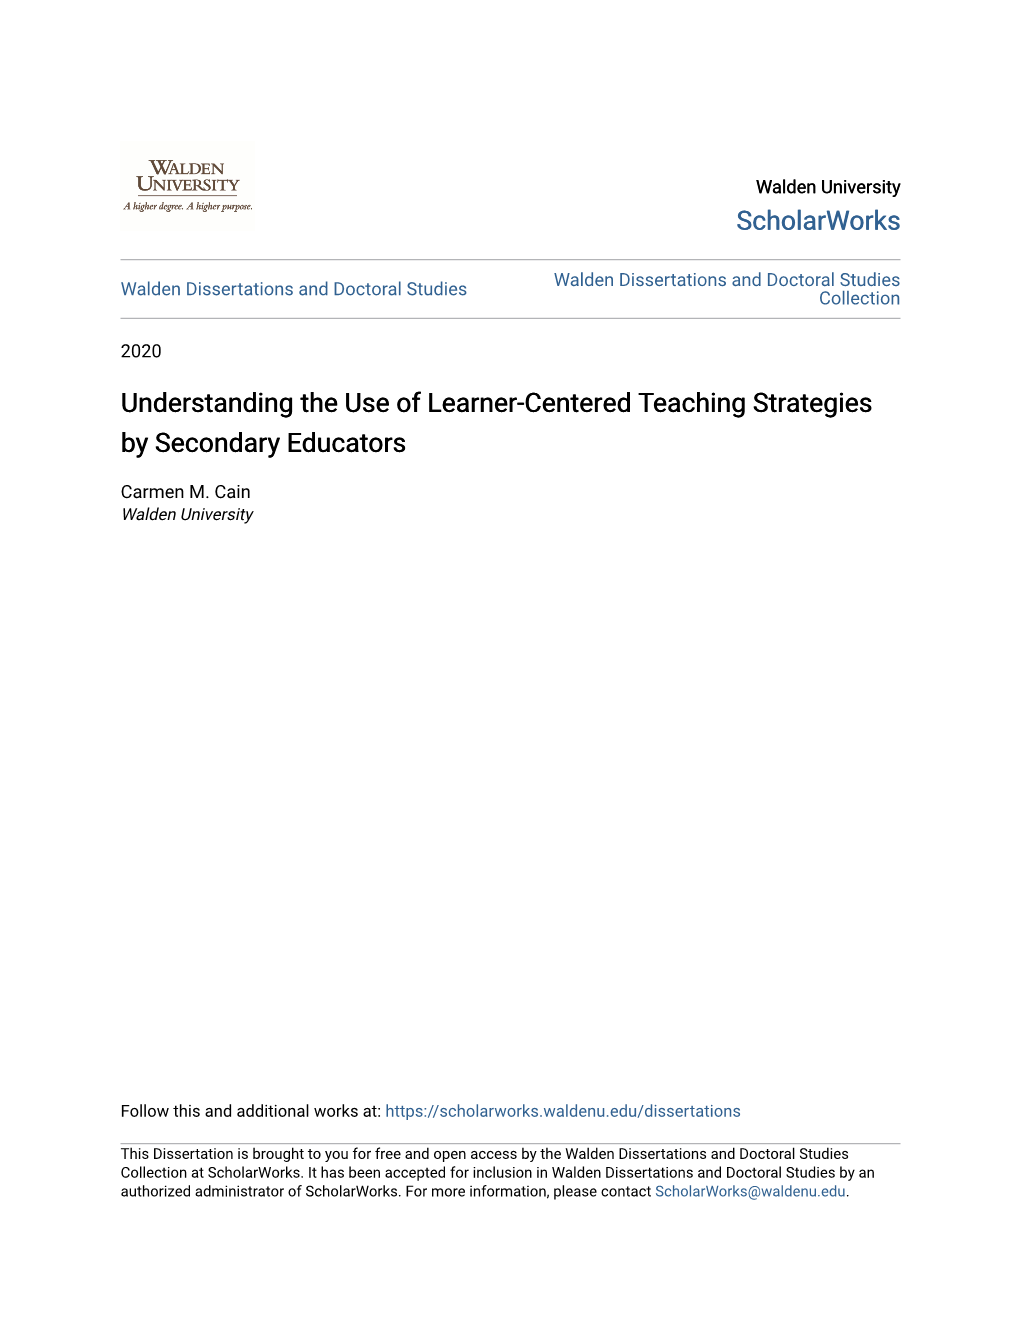 Understanding the Use of Learner-Centered Teaching Strategies by Secondary Educators